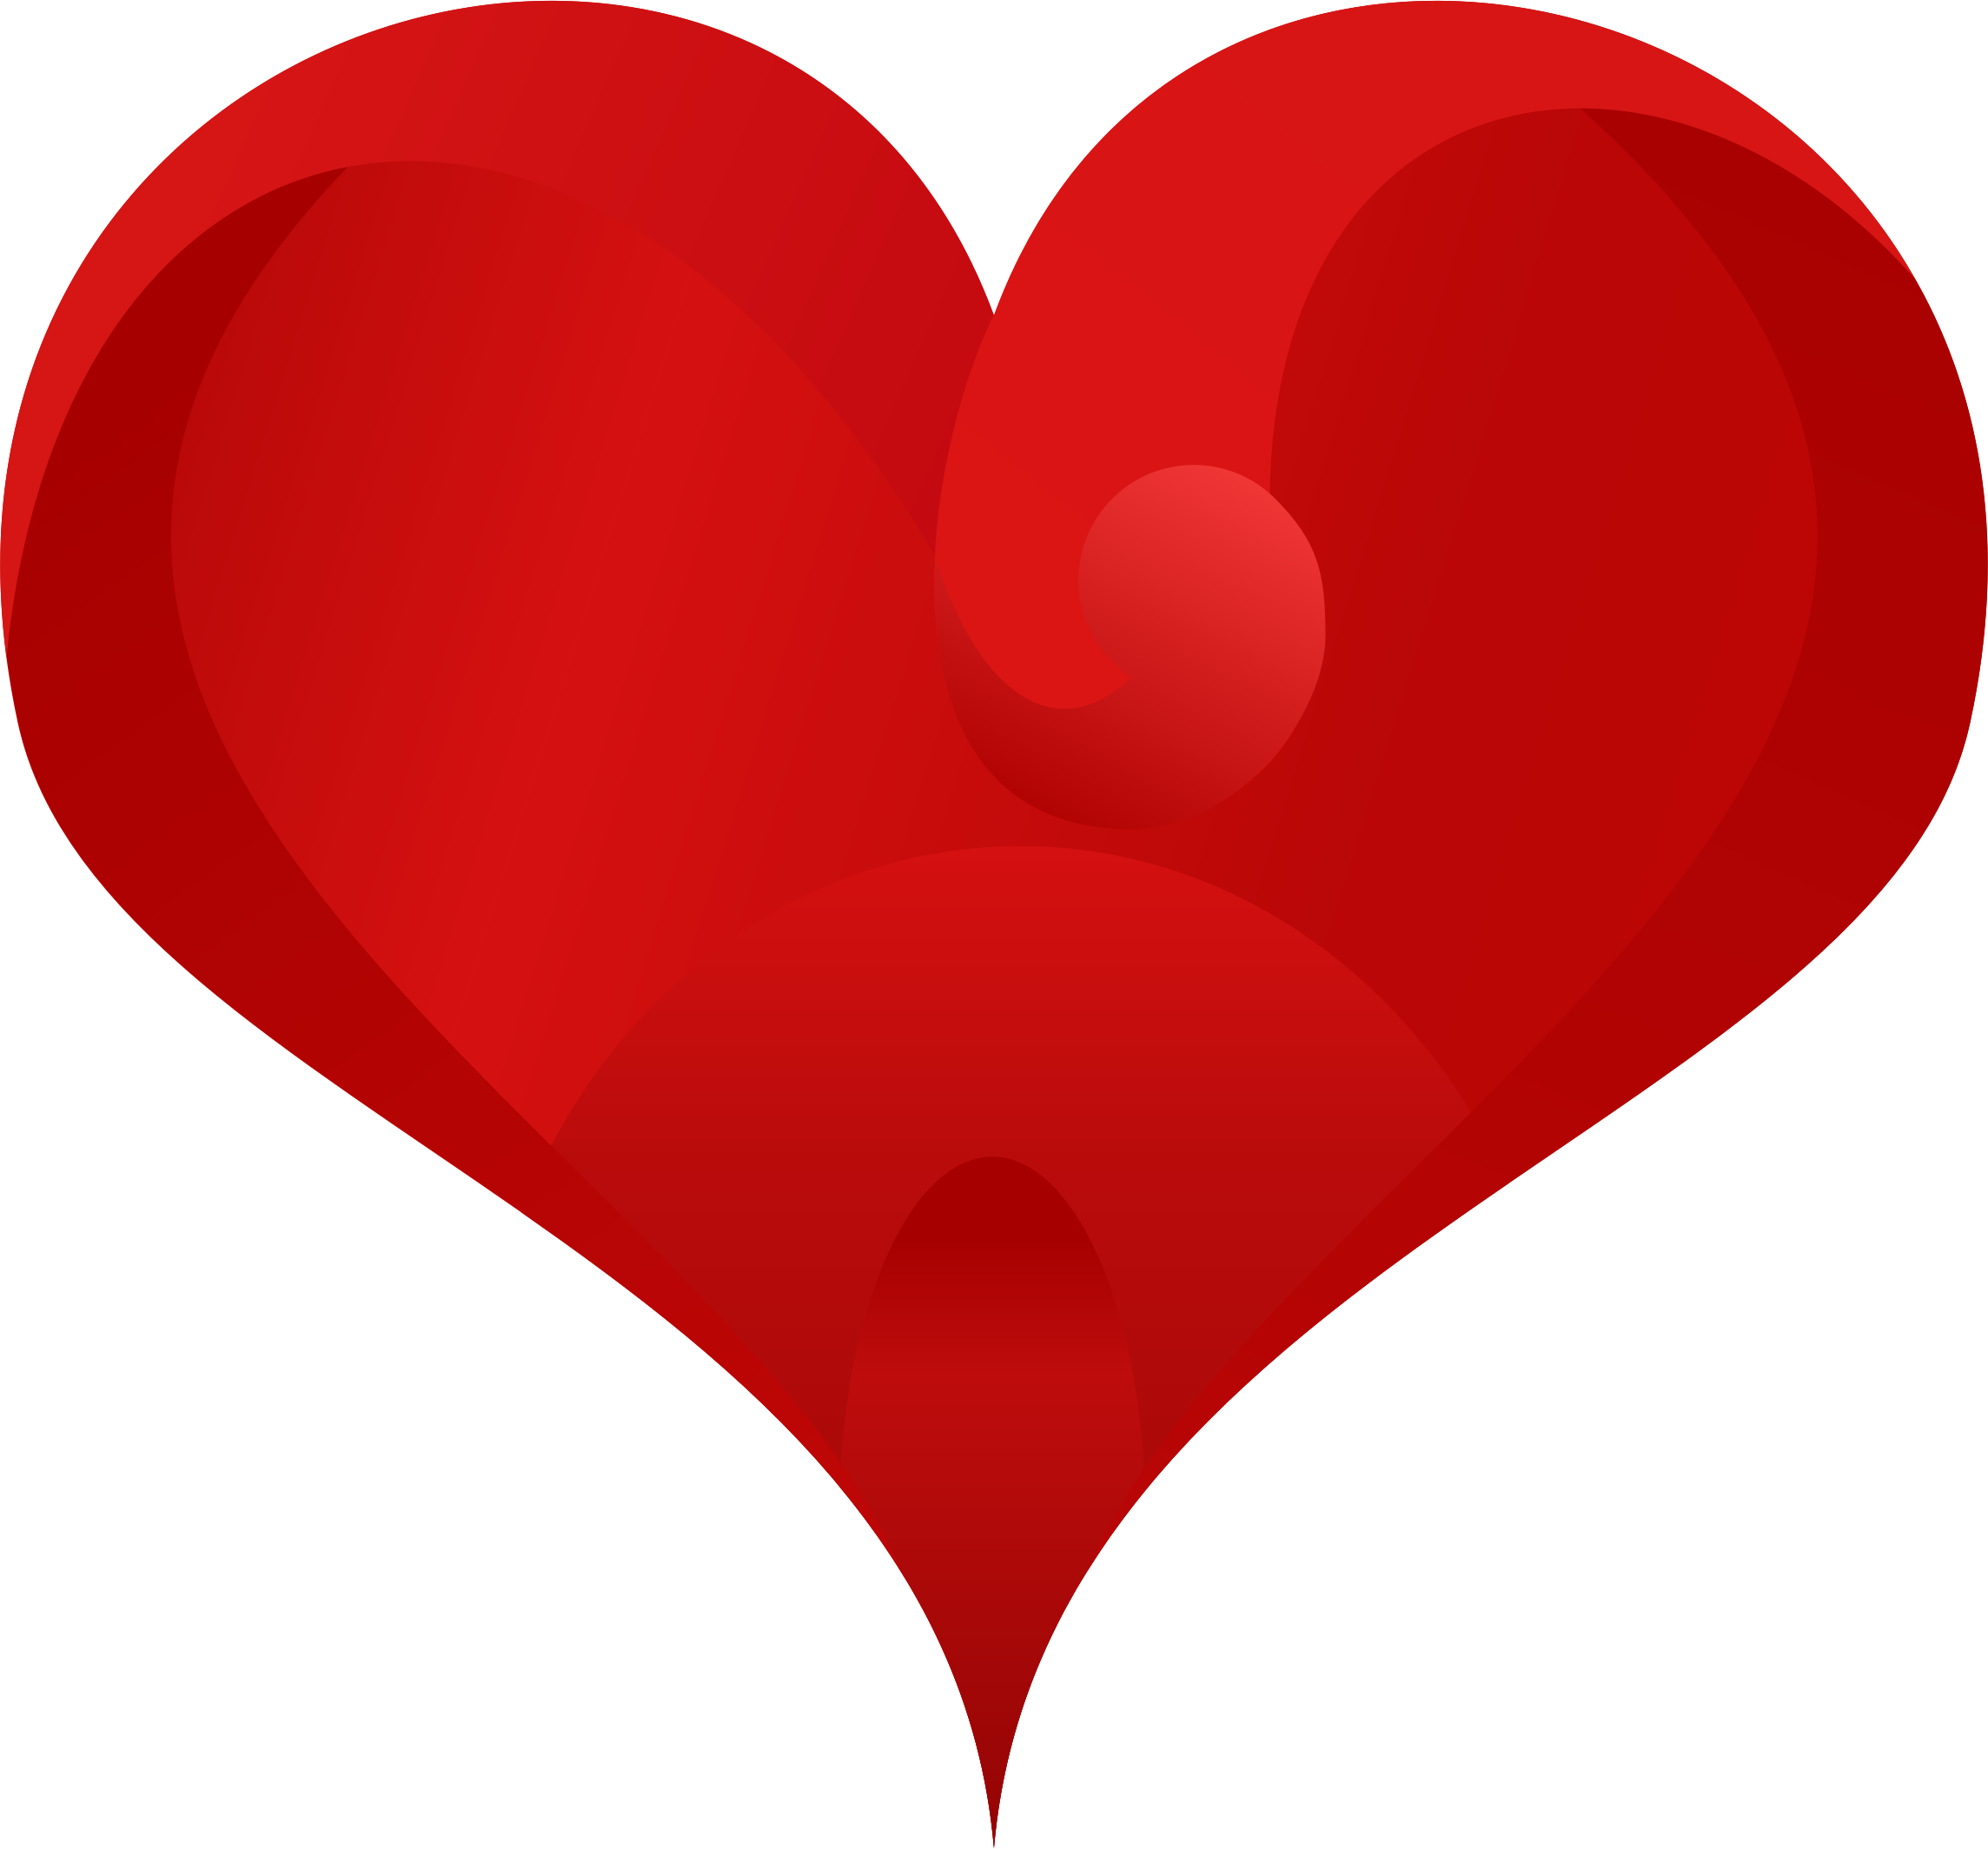 Heart Pictures For Valentines Day - Stylish Heart (2288x2128)